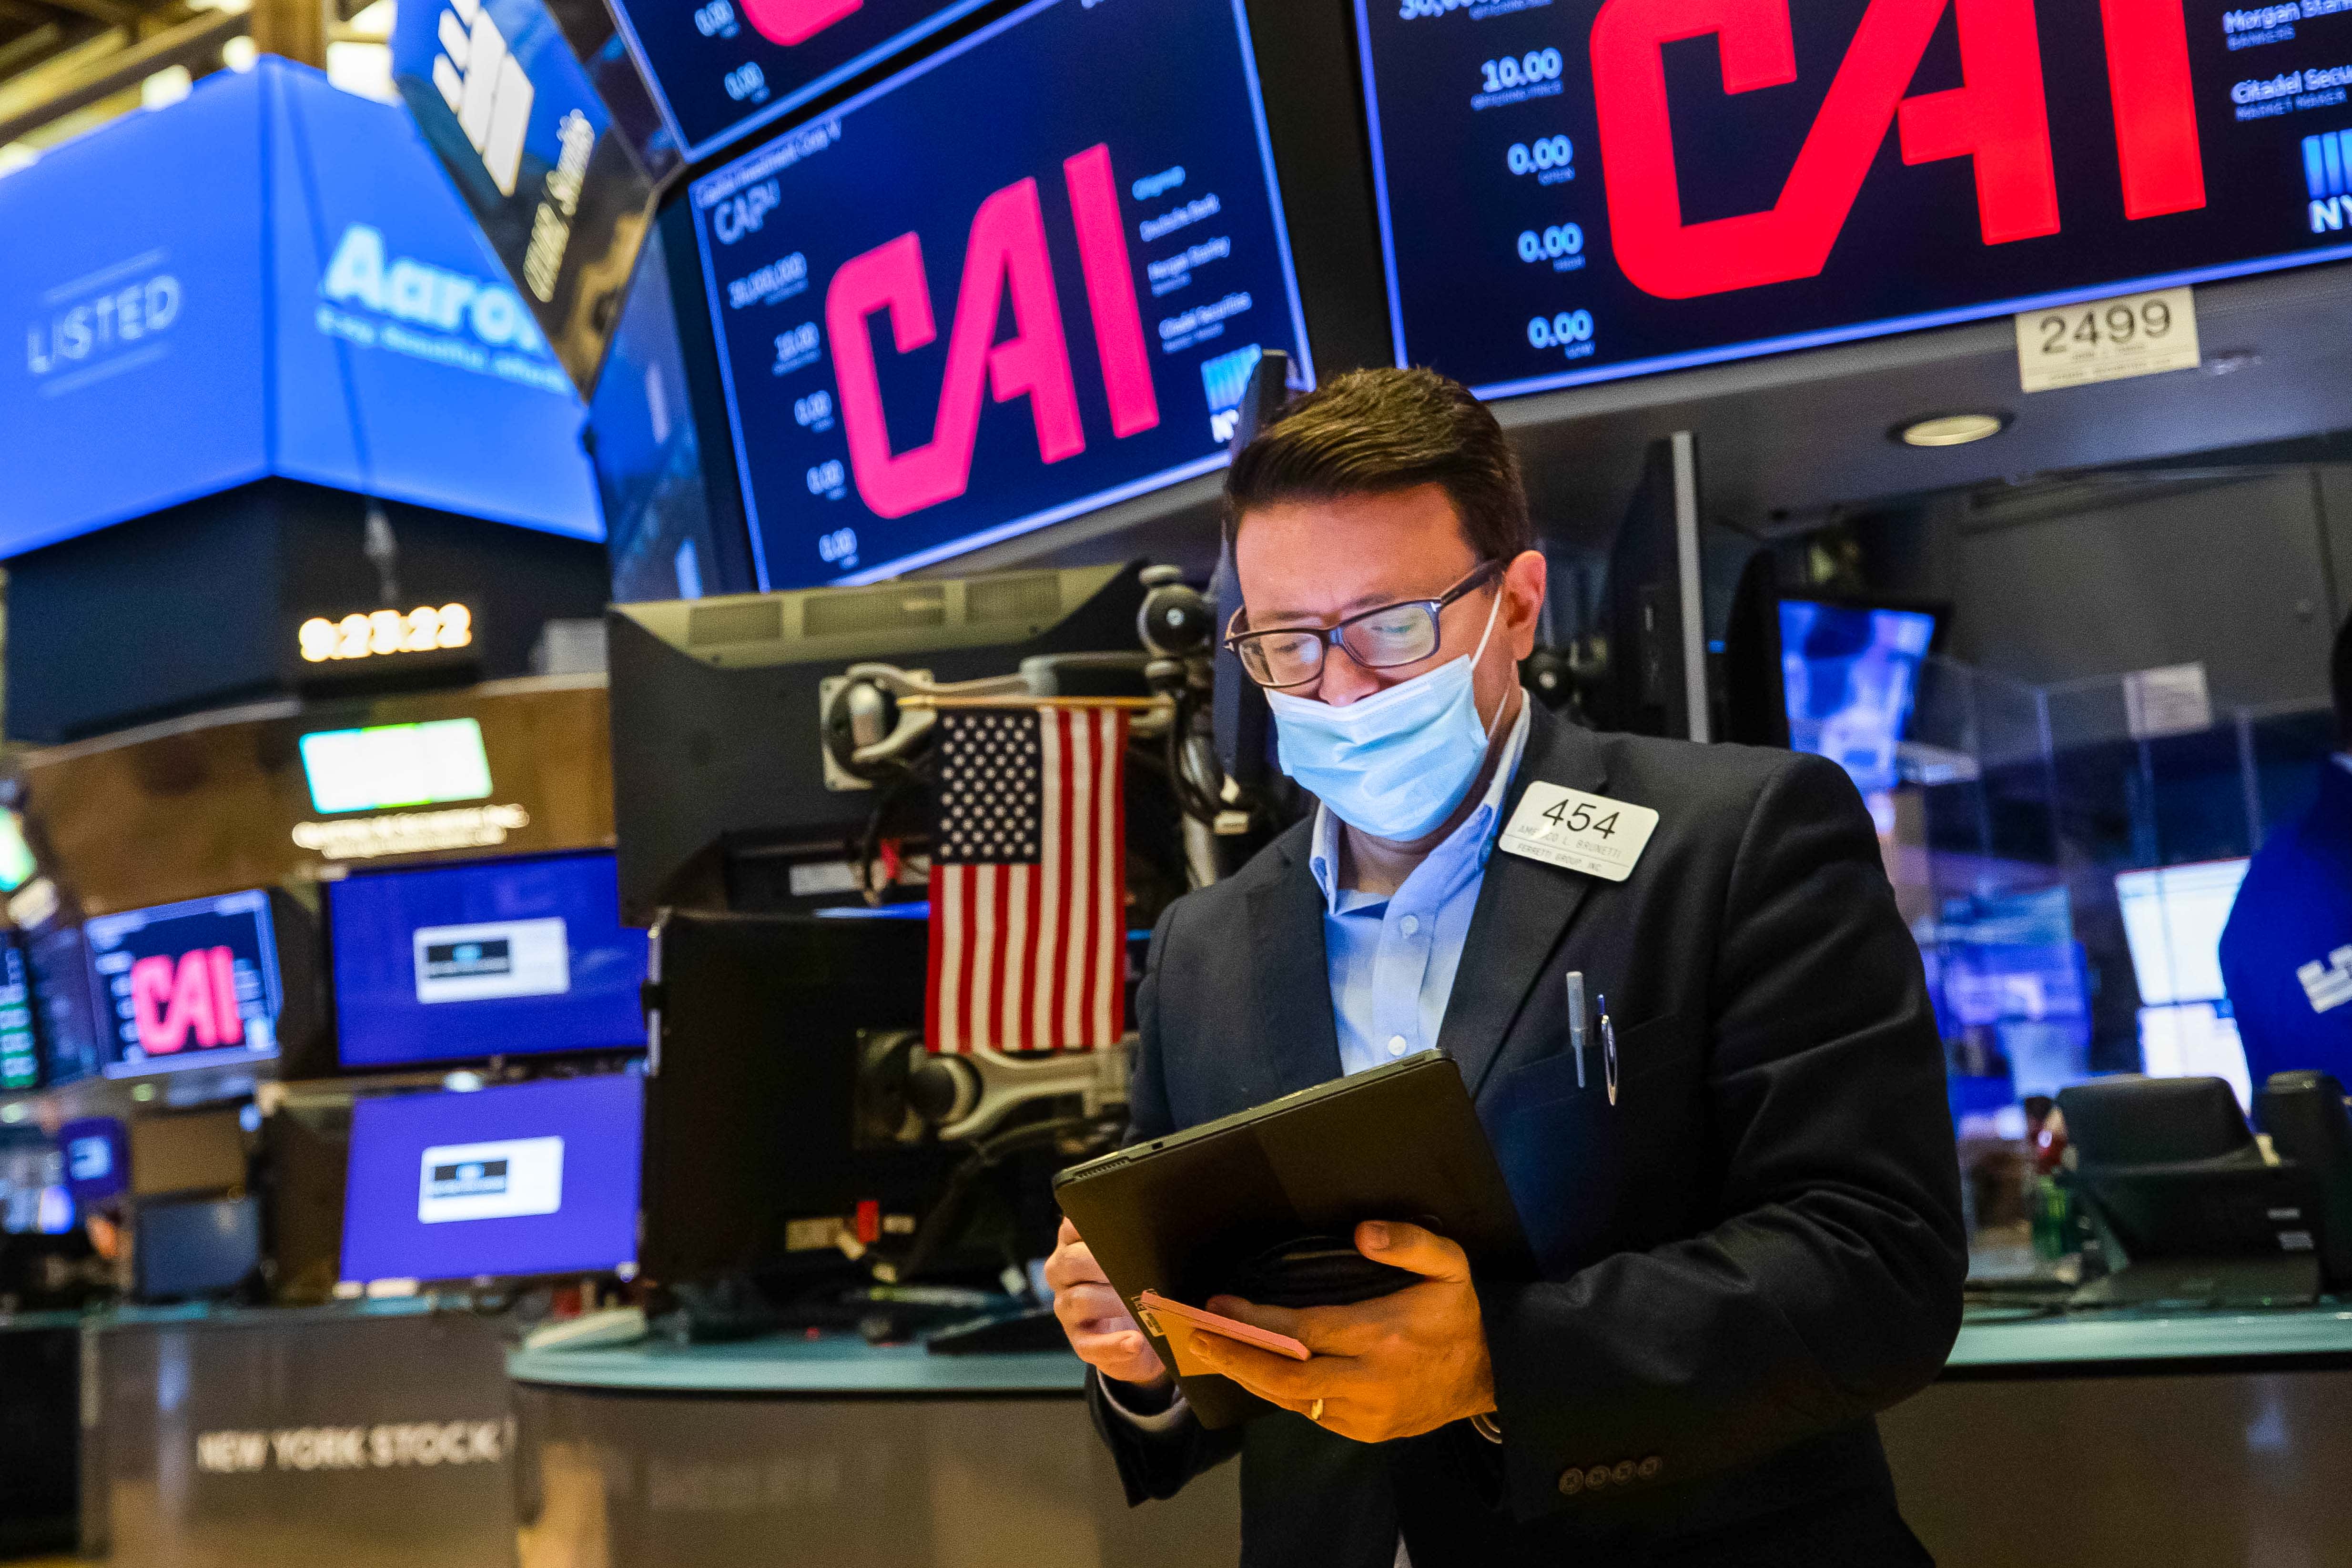 Some NYSE employees will return to remote operations